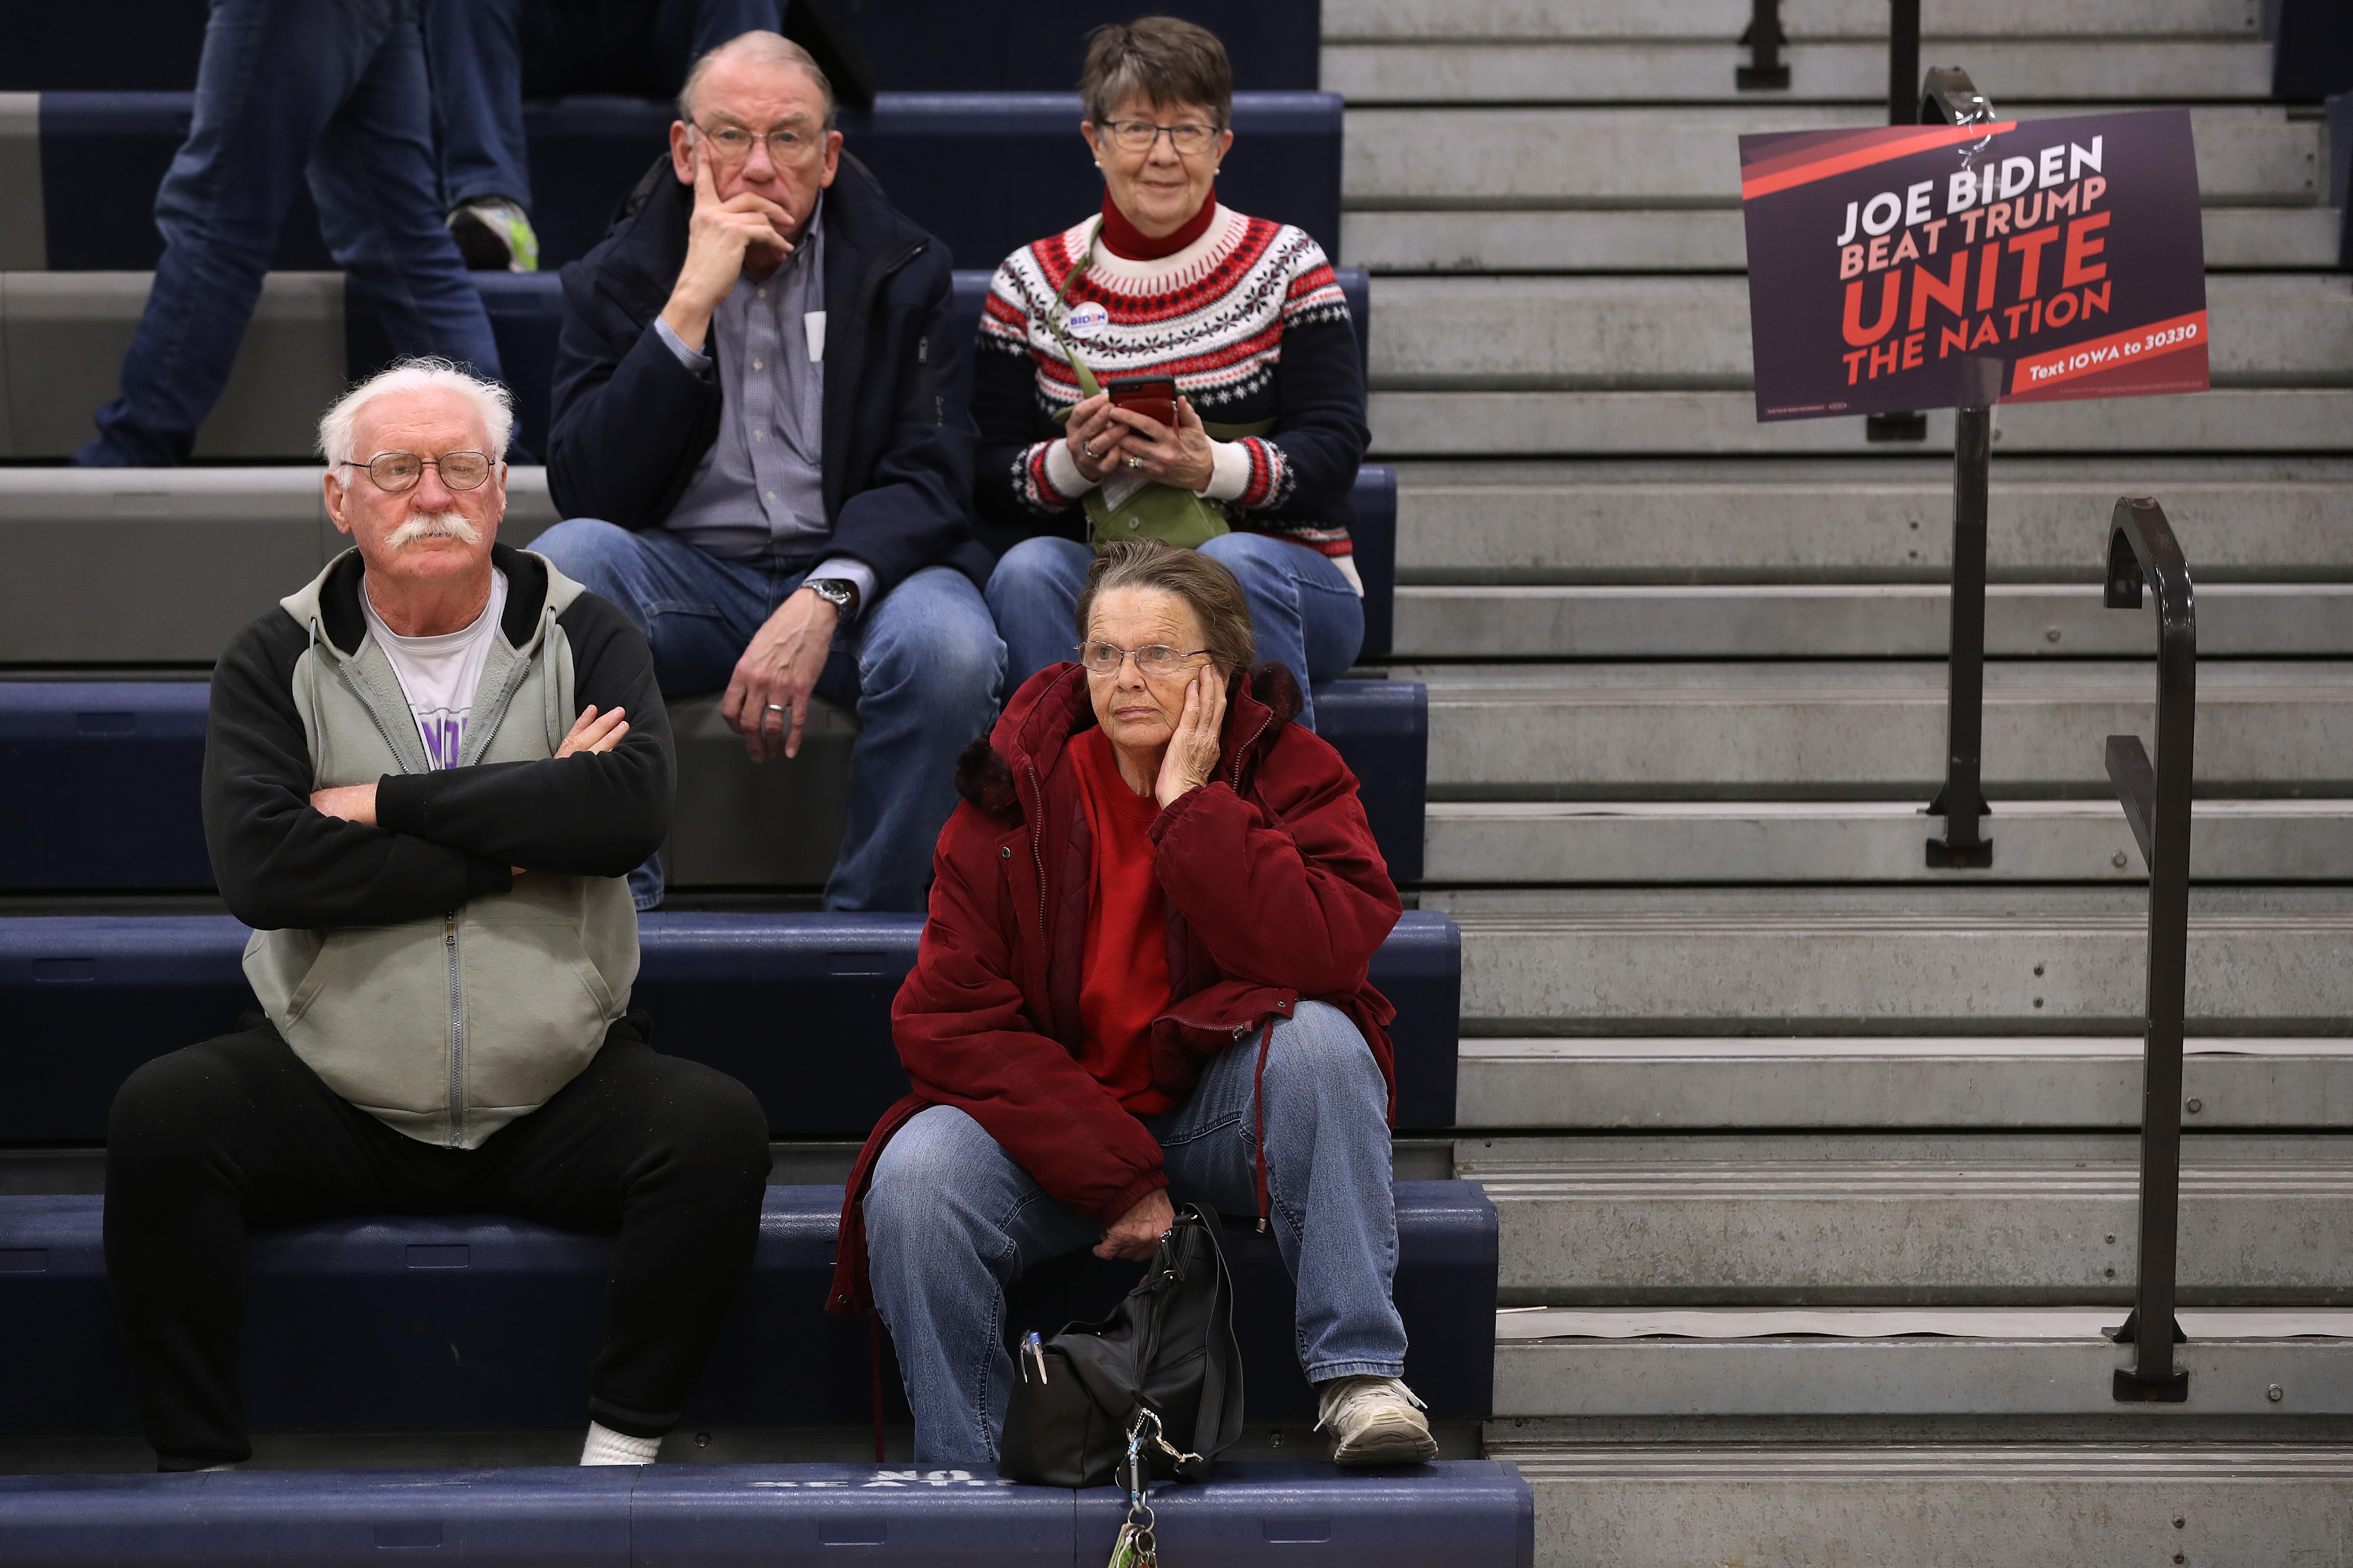 DES MOINES, IOWA - FEBRUARY 03: Supporters of Democratic presidential candidate former Vice President Joe Biden prepare to caucus for him in the gymnasium at Roosevelt High School February 03, 2020 in Des Moines, Iowa. Iowa is the first contest in the 2020 presidential nominating process with the candidates then moving on to New Hampshire. (Photo by Chip Somodevilla/Getty Images)